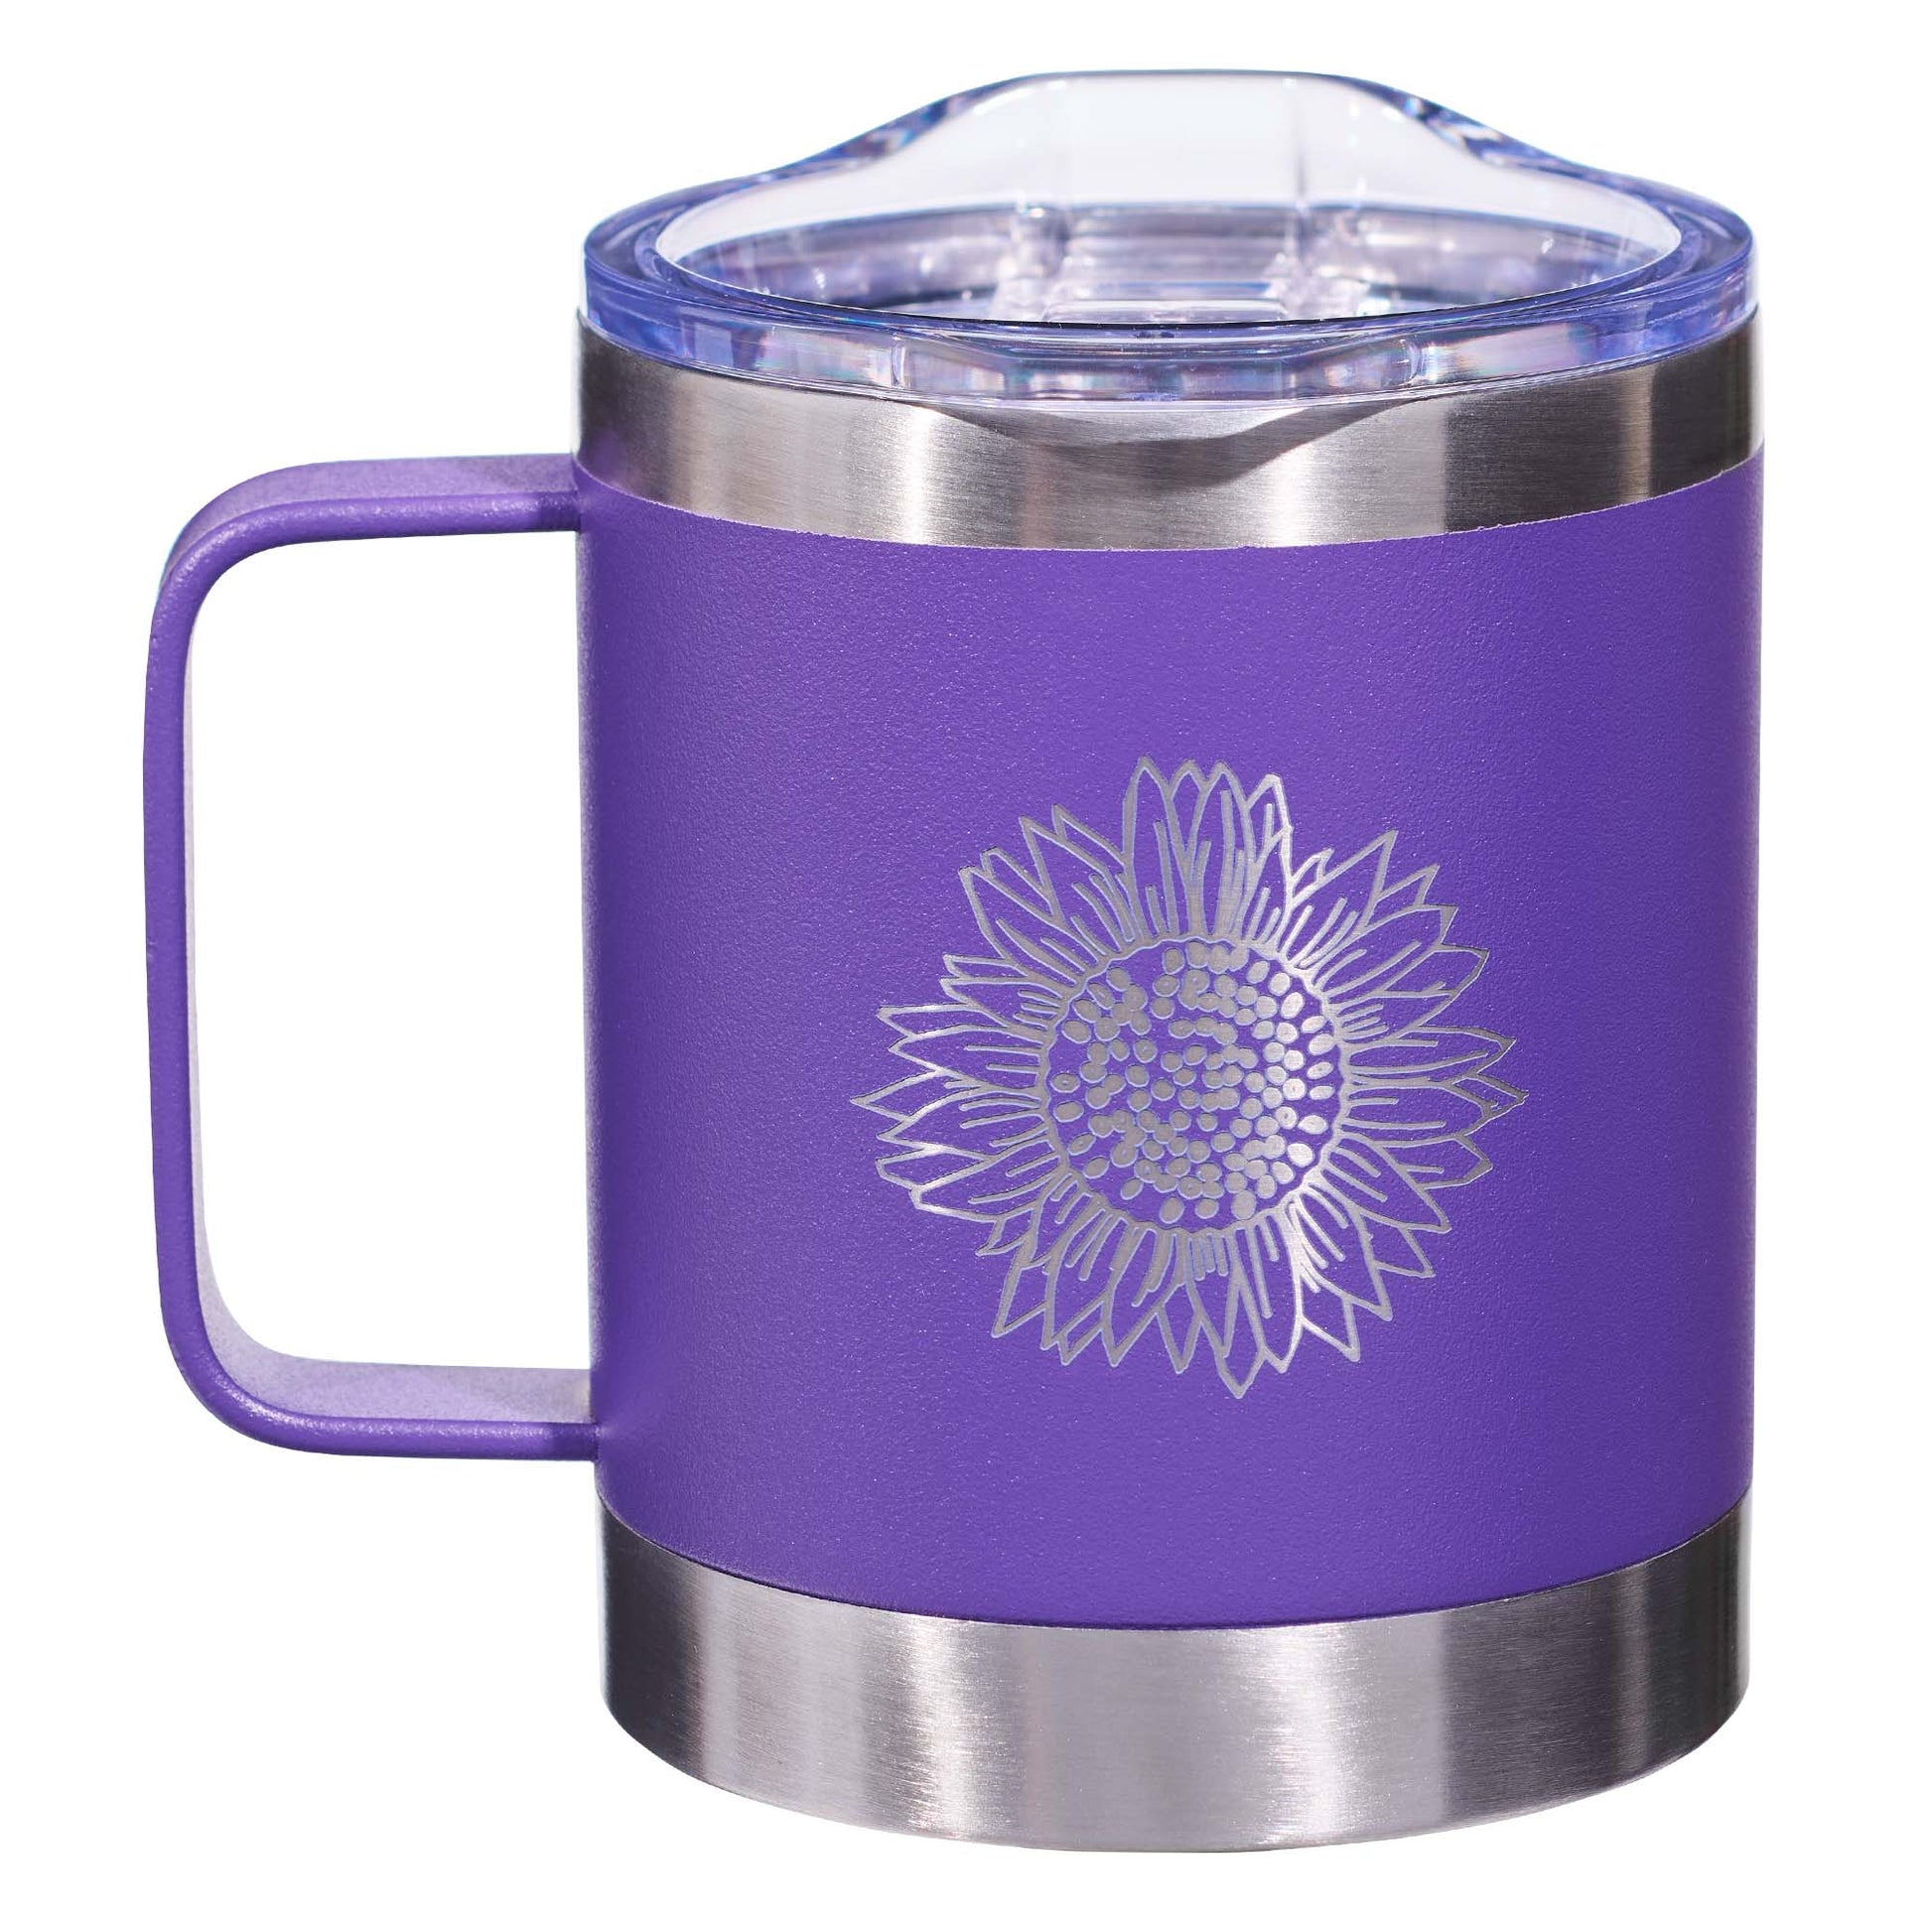 Strength & Dignity Purple Camp-style Stainless Steel Mug - Proverbs 31:25 - The Christian Gift Company